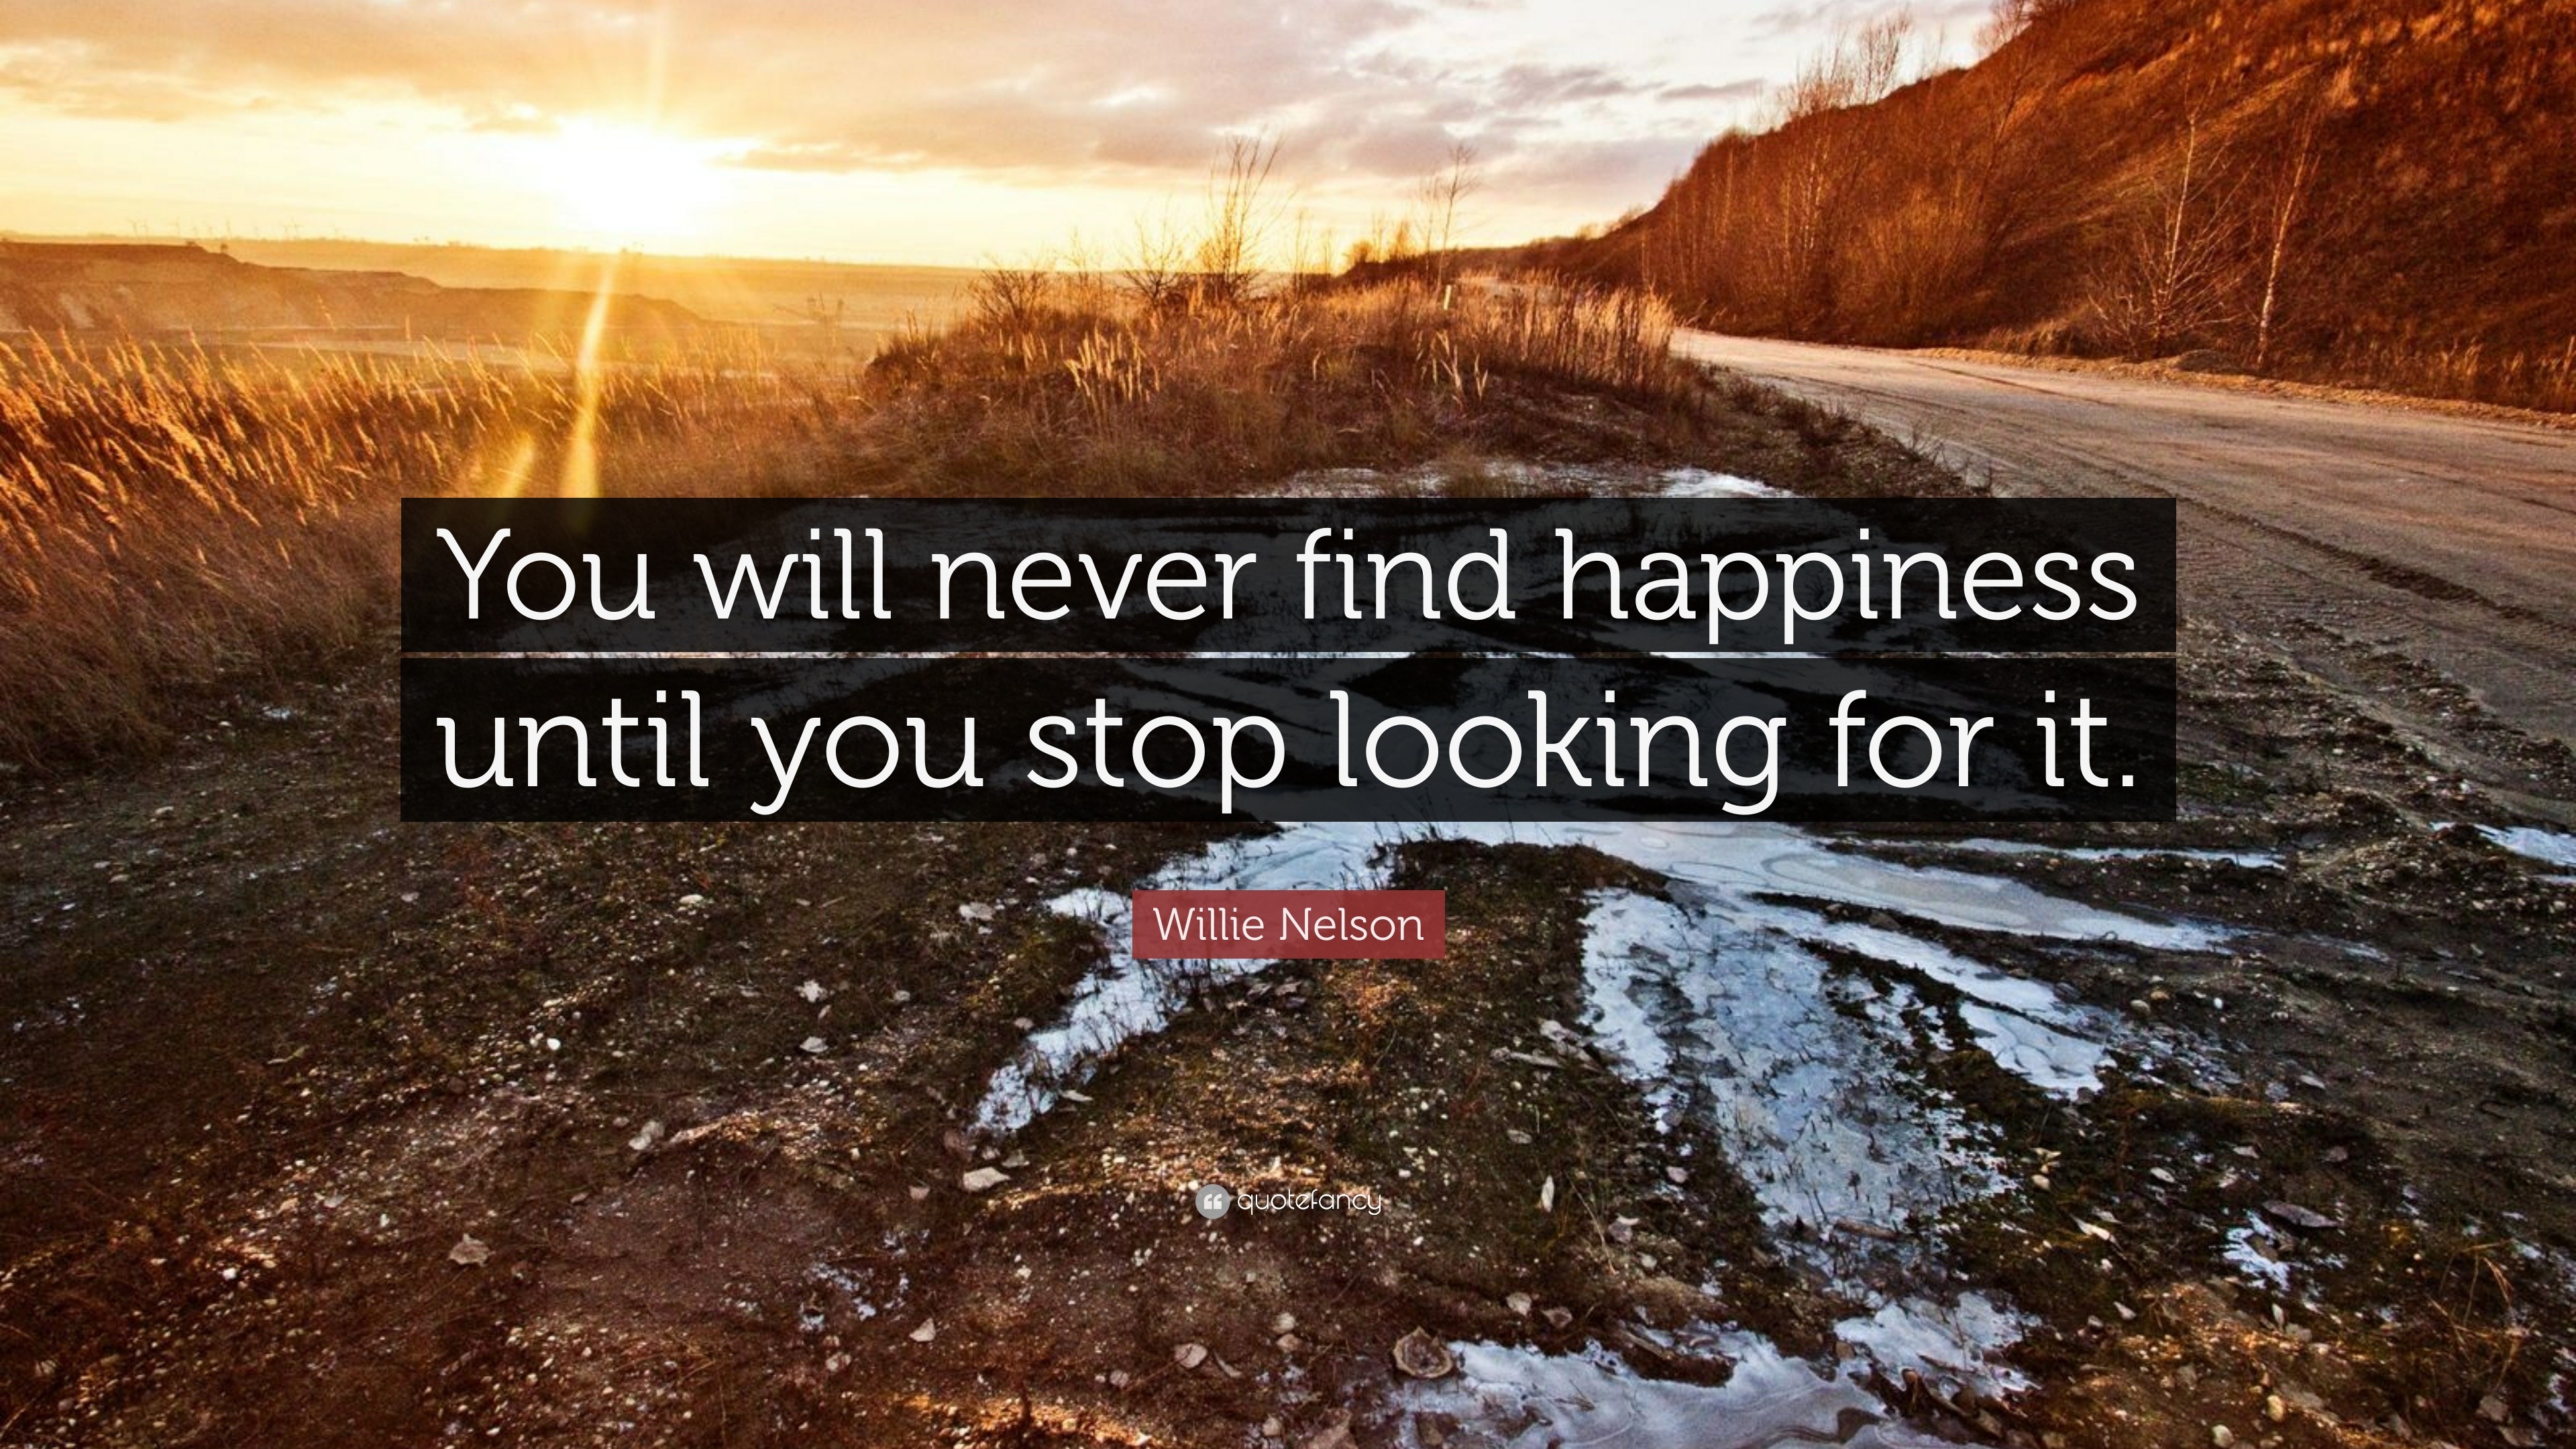 Willie Nelson Quote “You will never find happiness until you stop looking for it